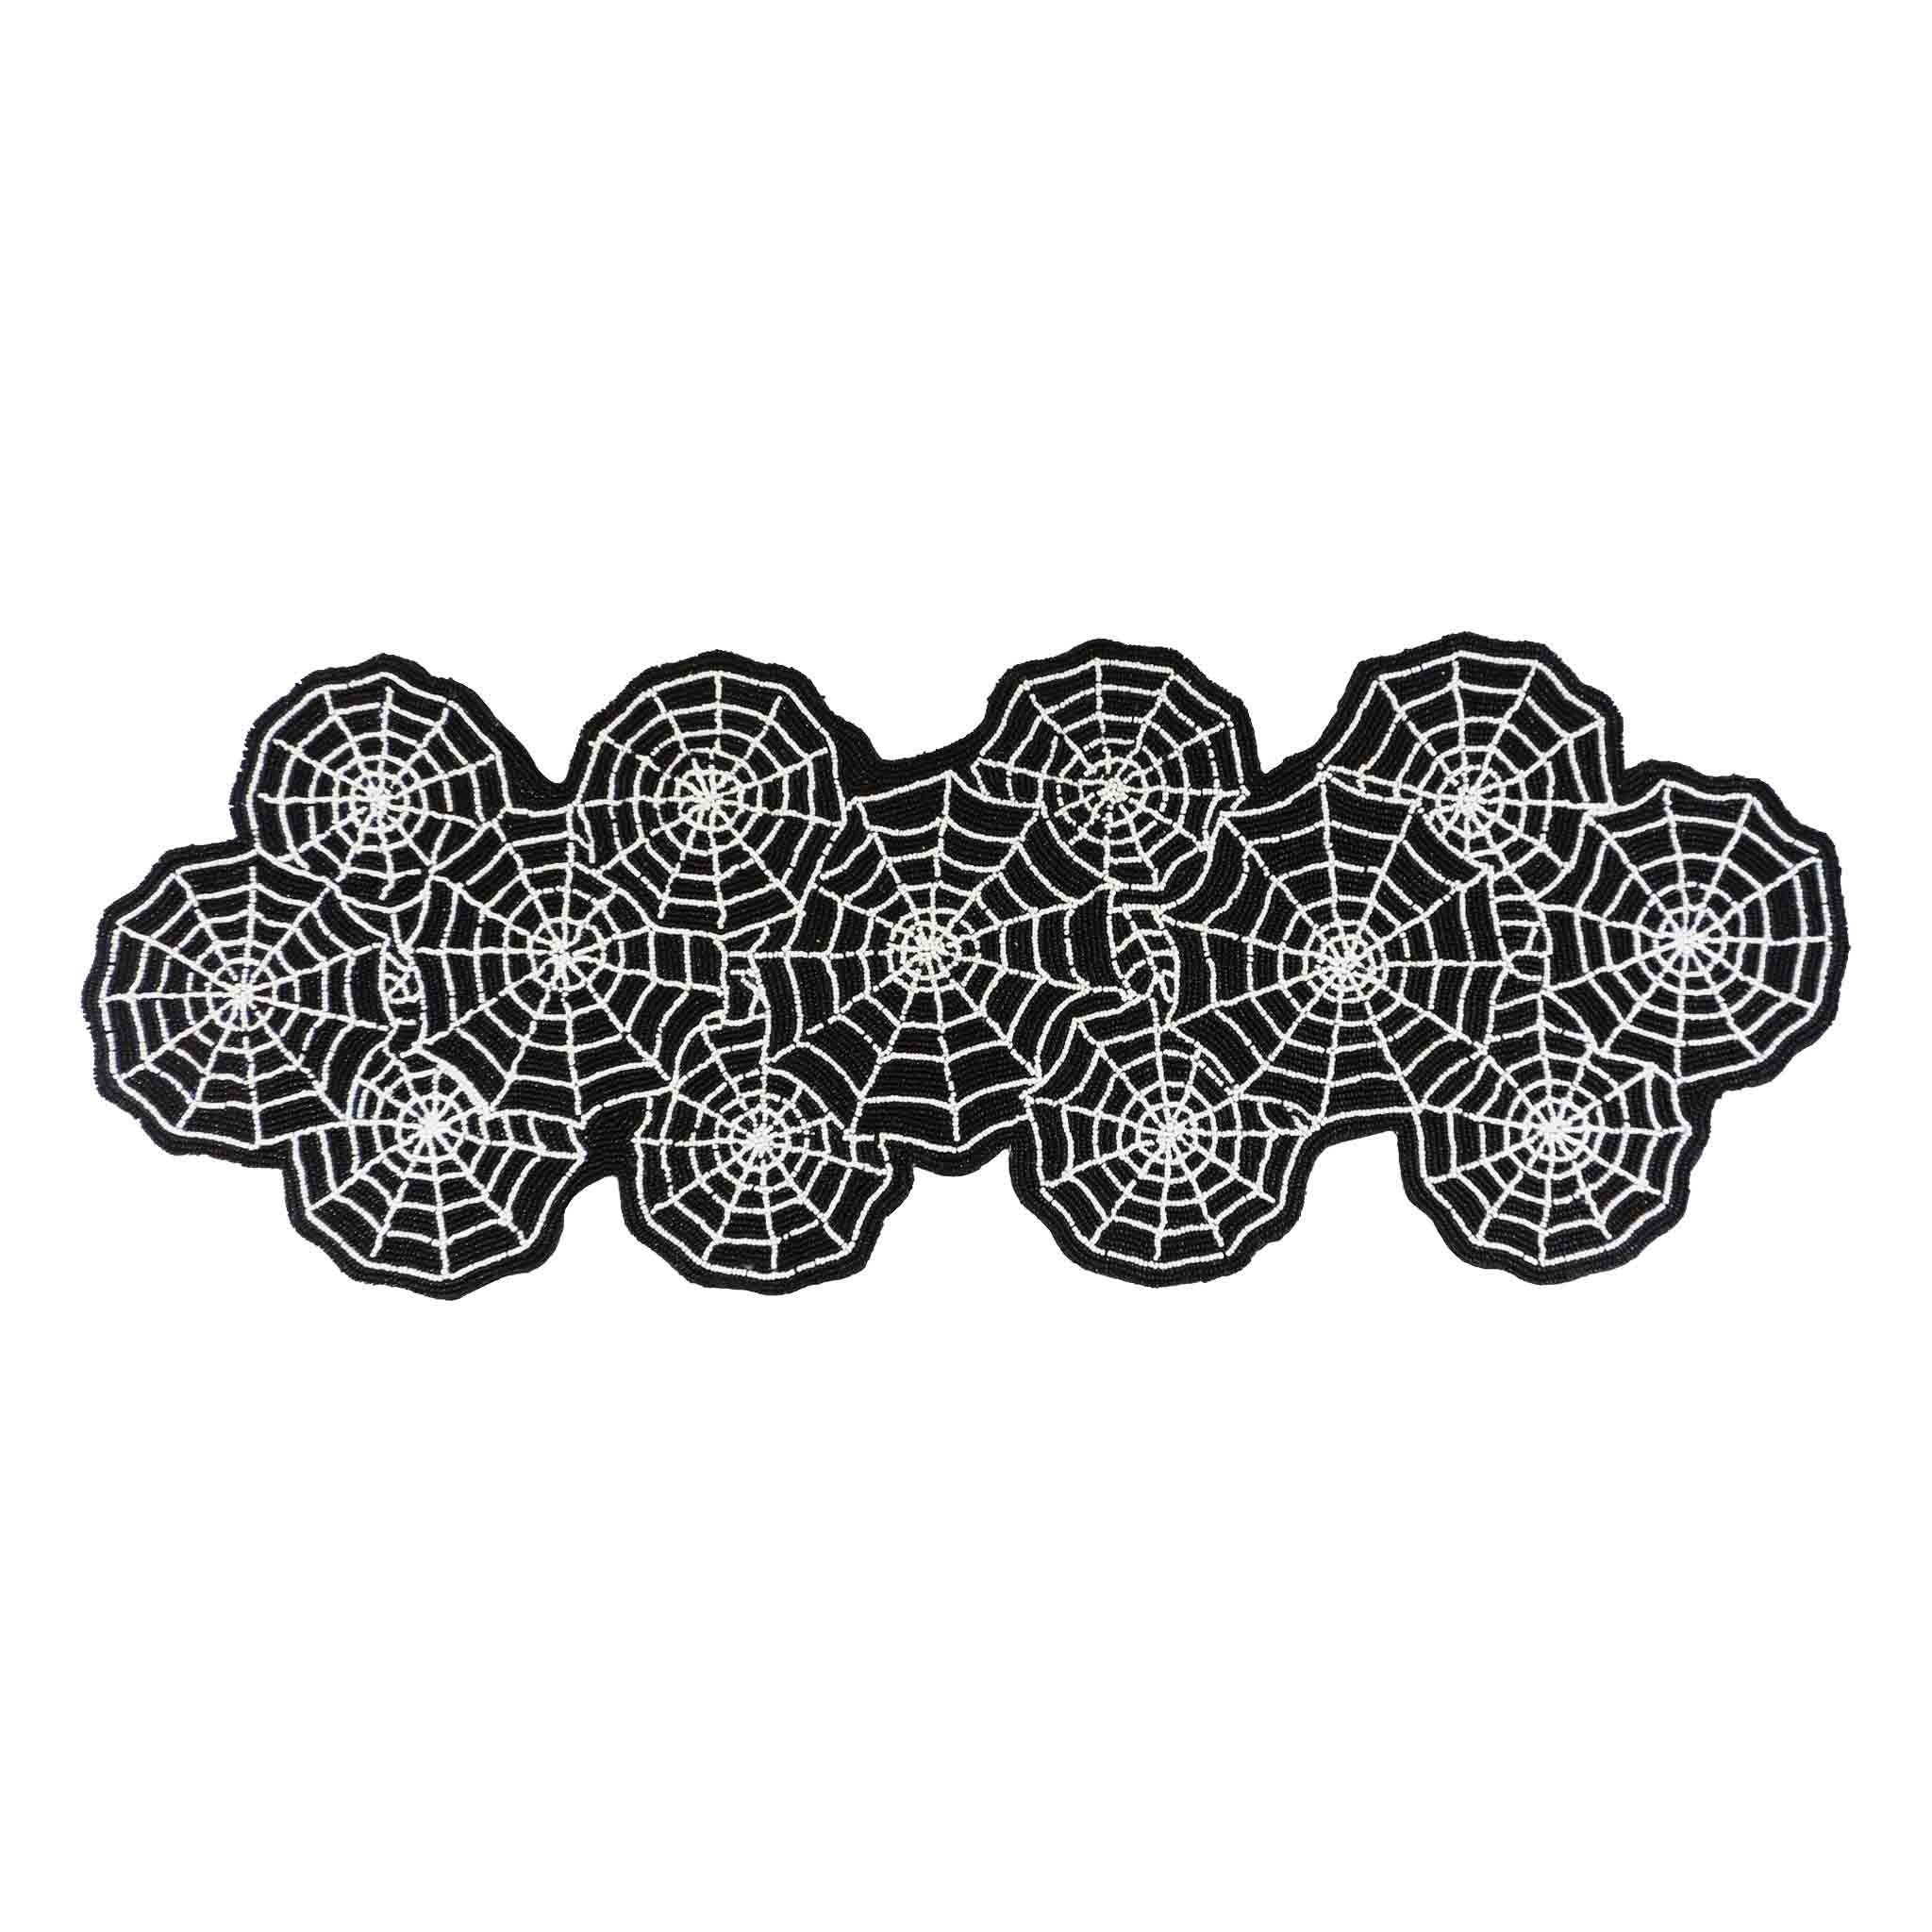 Spiderweb Bead Table Setting for 4 - Embroidered Placemats, Napkin Rings & Table Runner in Black and Silver